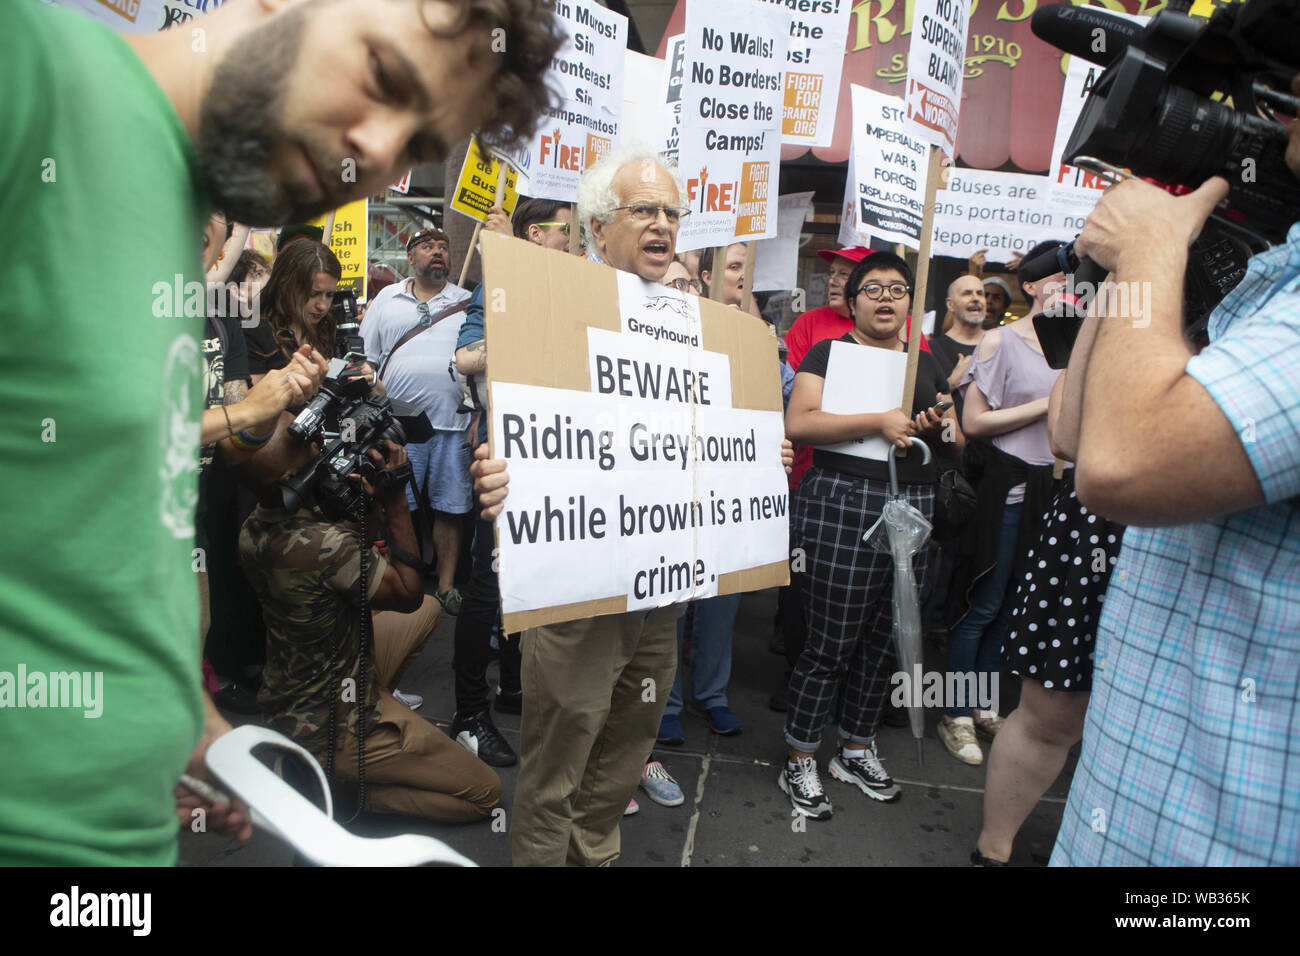 August 23, 2019: A demonstrator is shown protesting against Greyhound Corporation and ICE (Immigration Customs and Enforcement) at the Port Authority Bus Terminal on 42nd and 8th Avenue in New York, New York. About 100 activists from a coalition of groups including FIRE (Fight For Immigrant Refugees Everywhere) protested Greyhound allowing ICE agents to board their busses 'searching for migrants,'' officials said. Credit: Brian Branch Price/ZUMA Wire/Alamy Live News Stock Photo